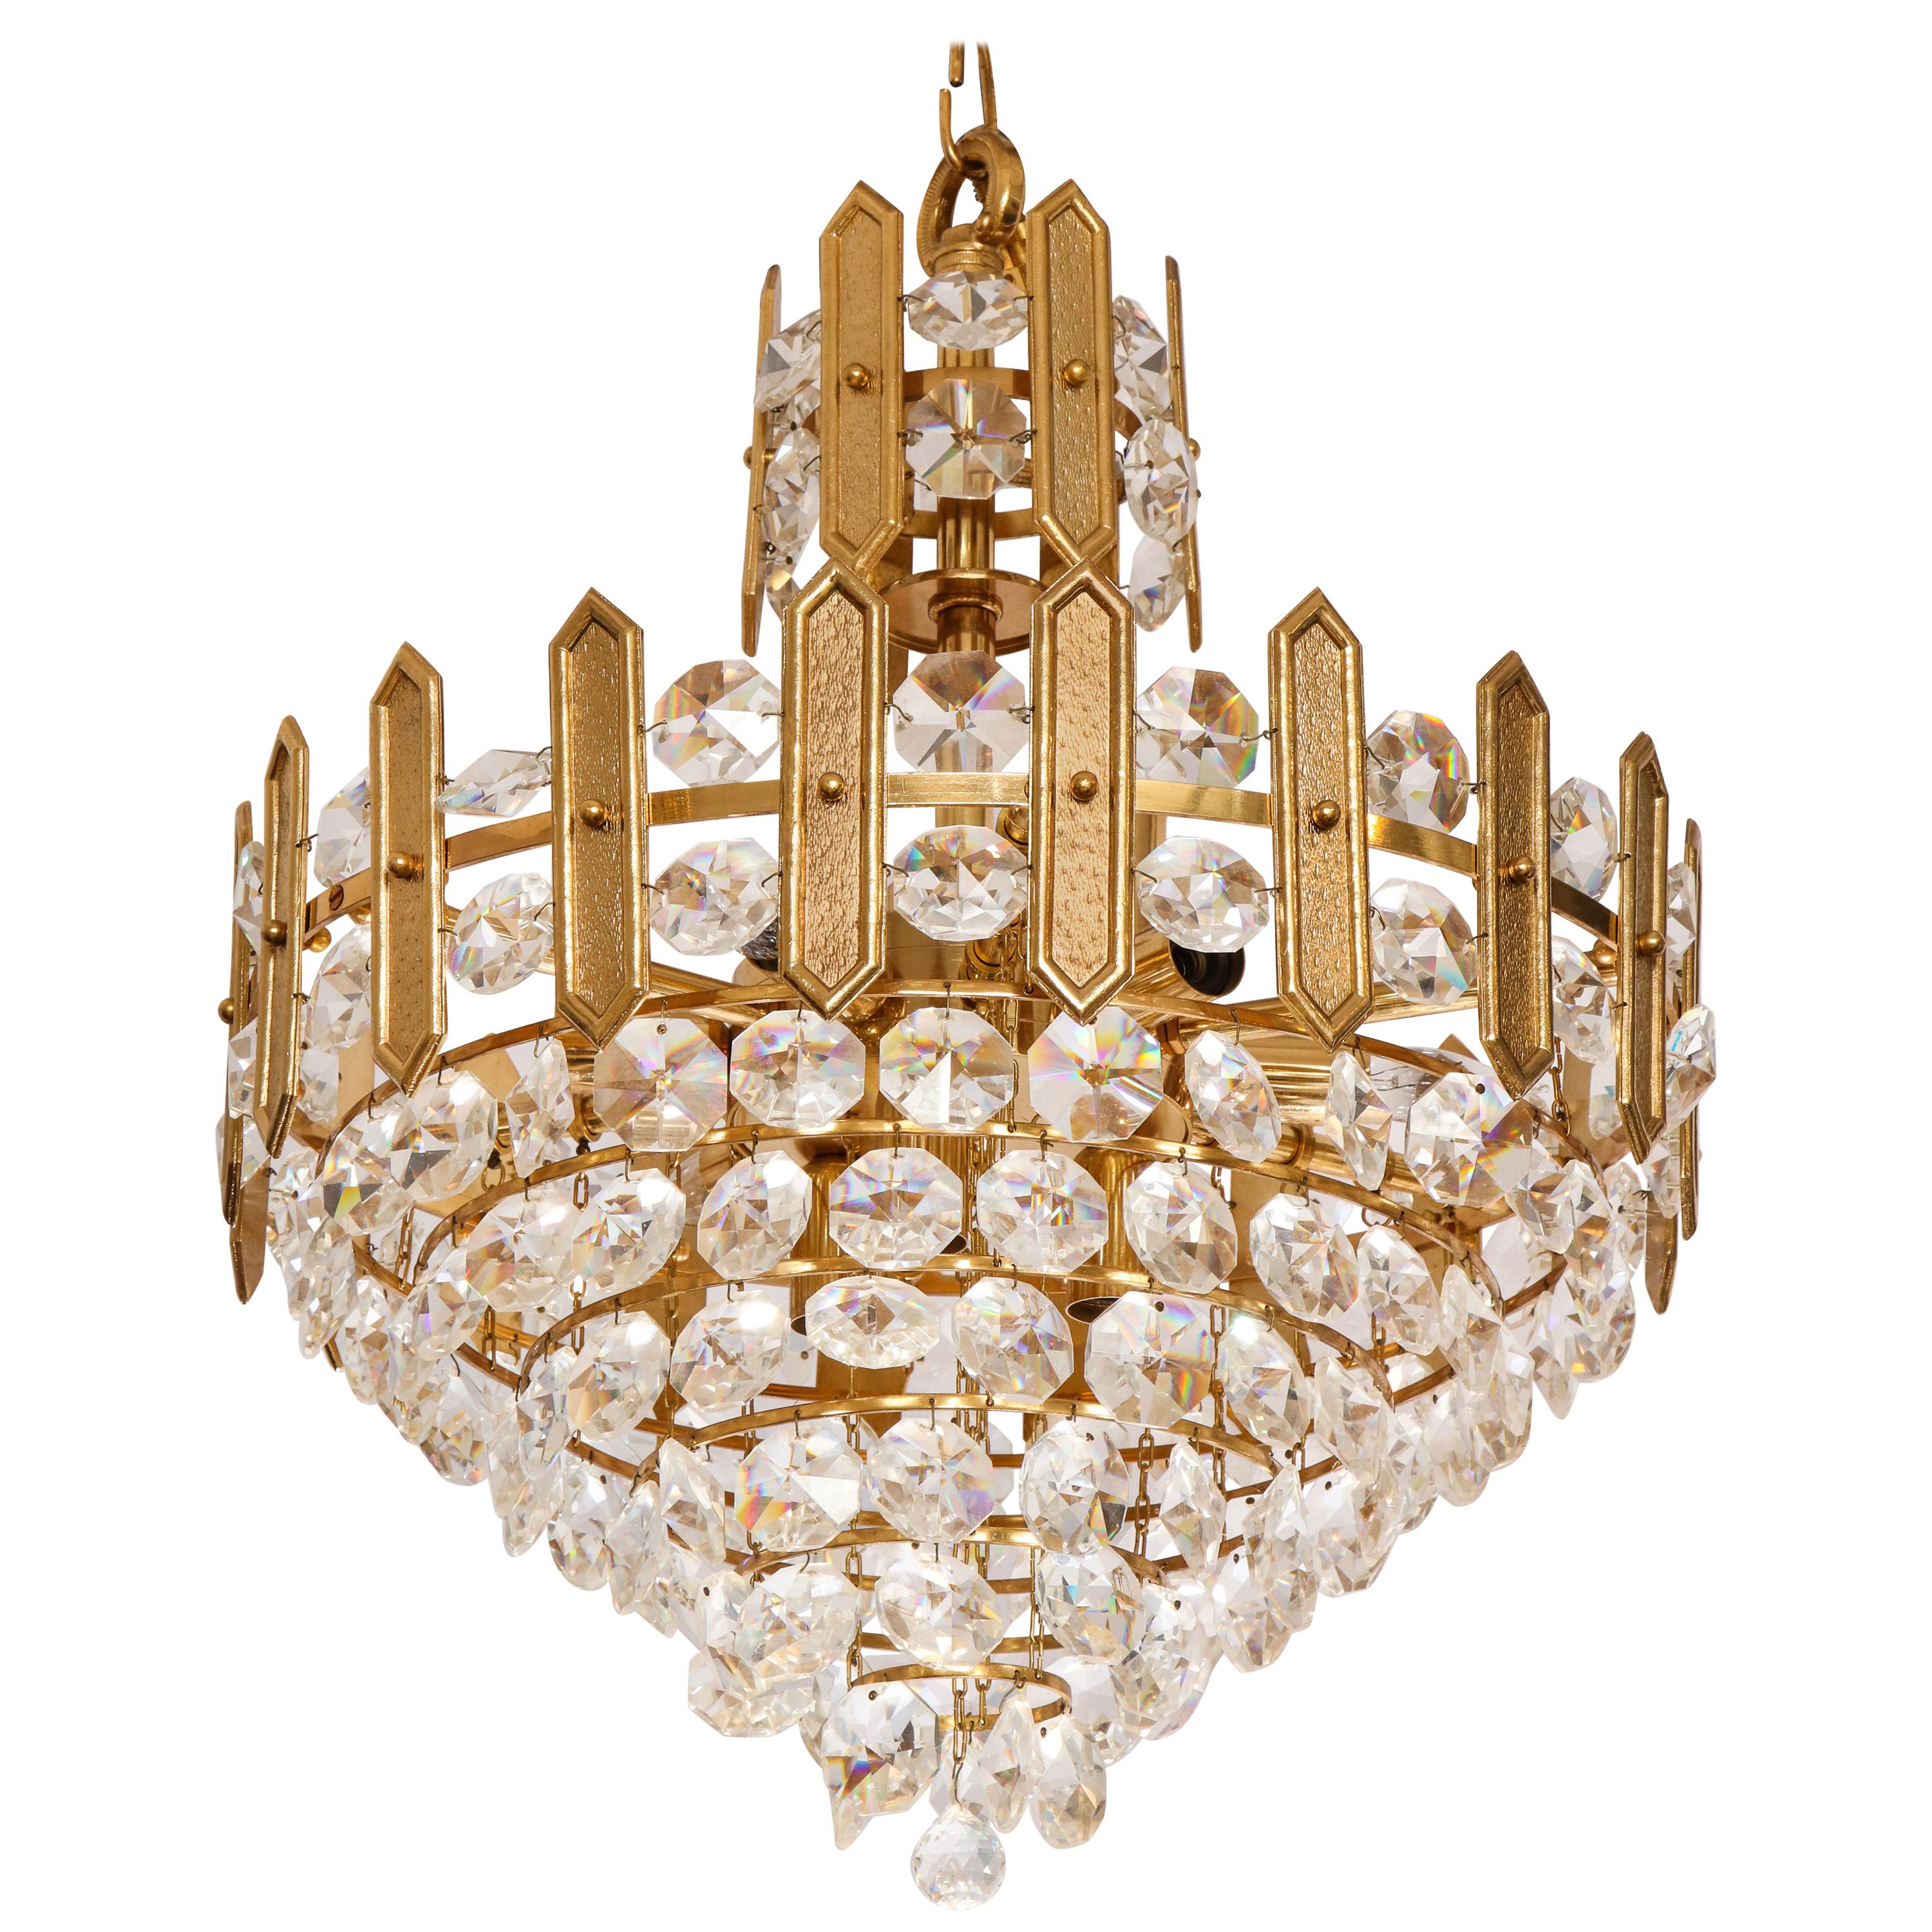 Embossed brass and crystal tiered chandelier by Palwa